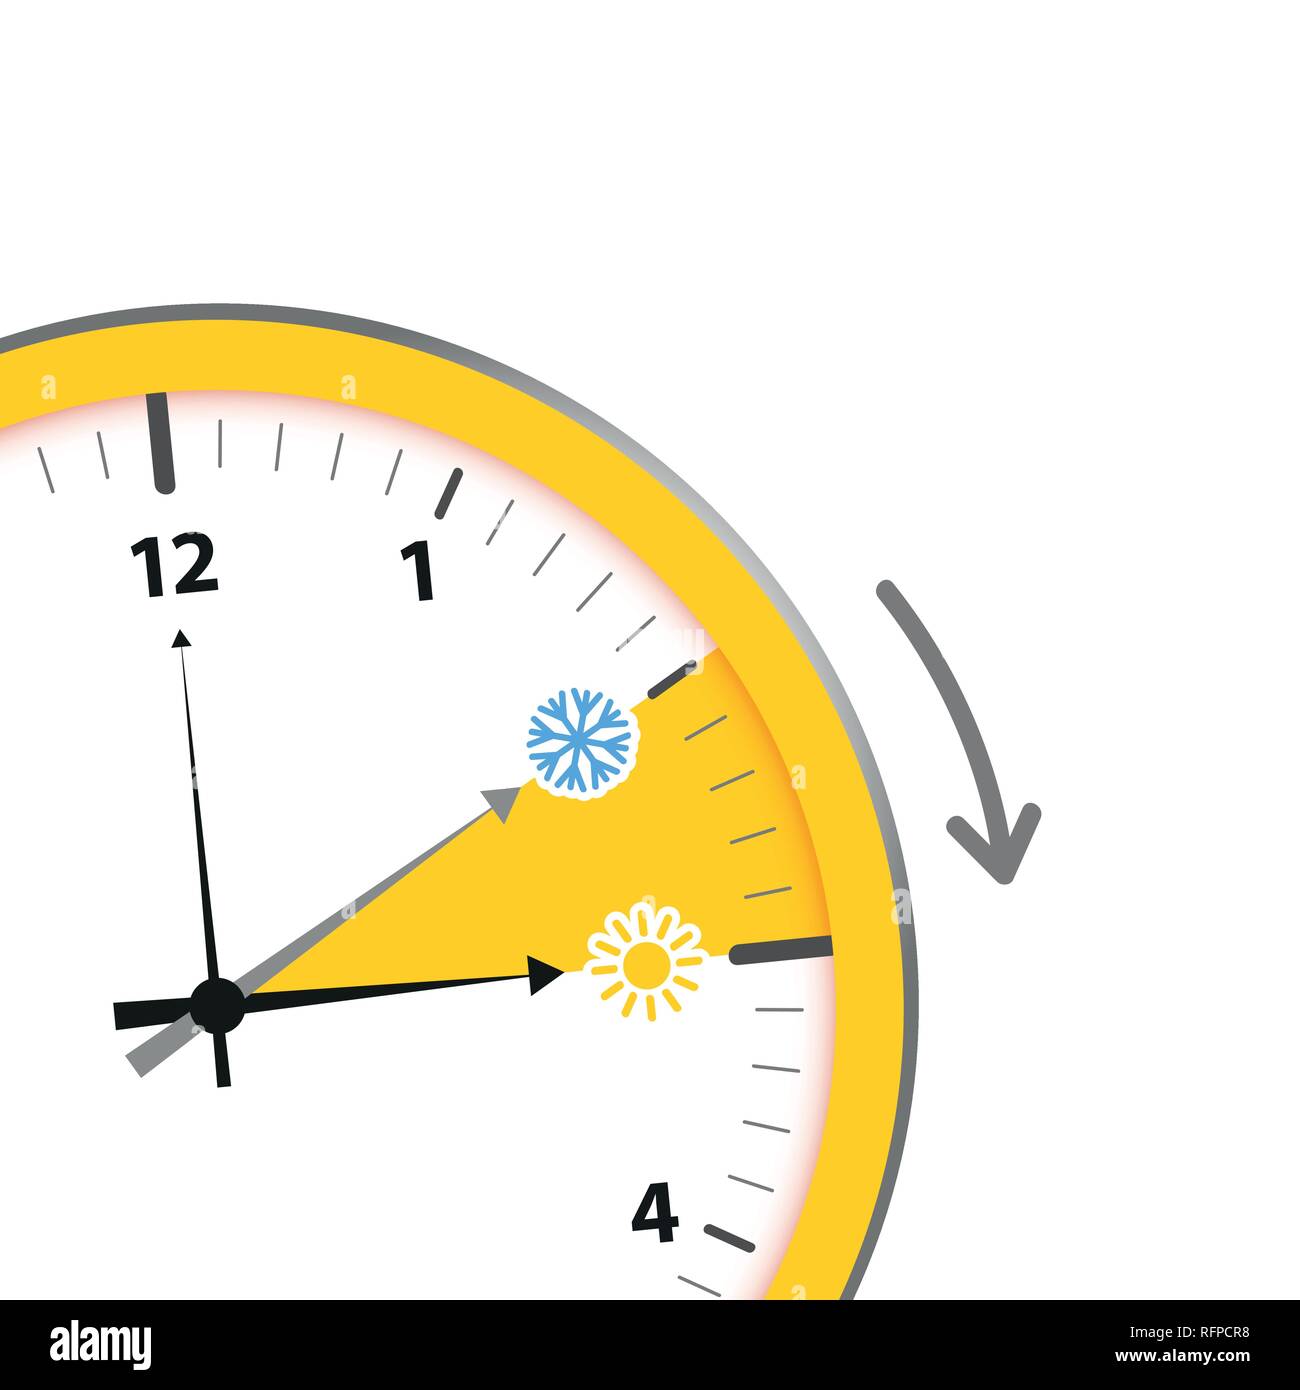 Time Change Daylight Vector & Photo (Free Trial)